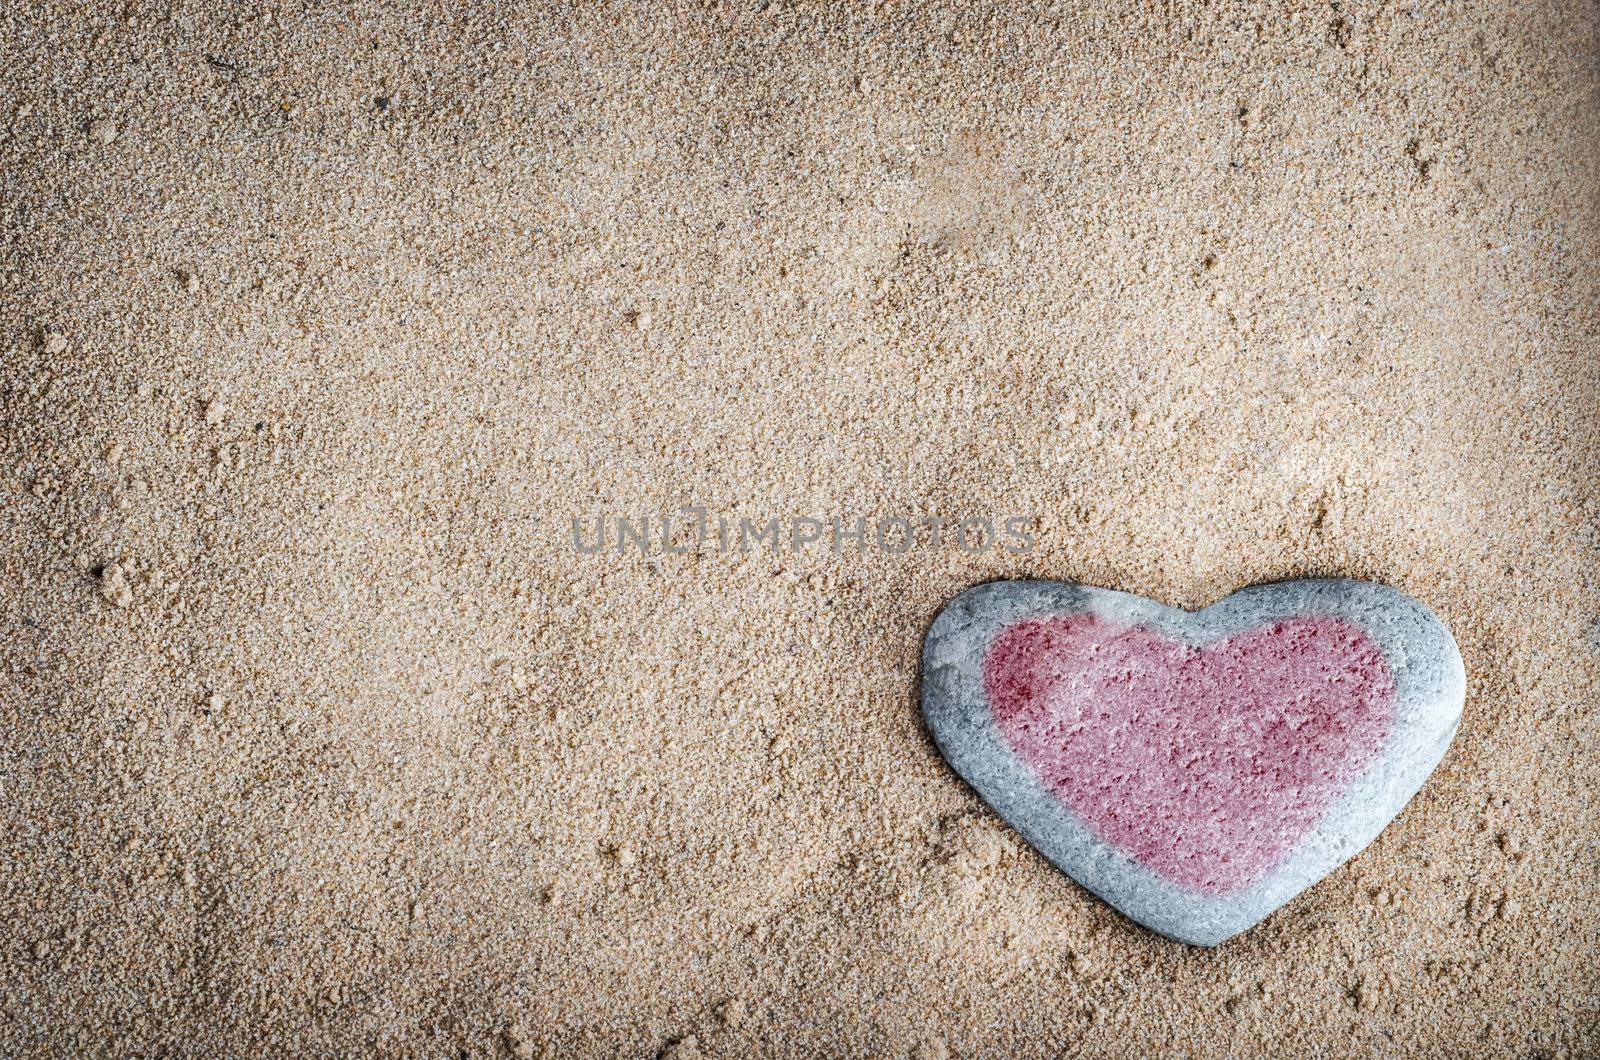 A grey heart shaped stone on grainy sand, tinted with a red heart.  This version is vignetted and edited to give a retro or lo-fi appearance.